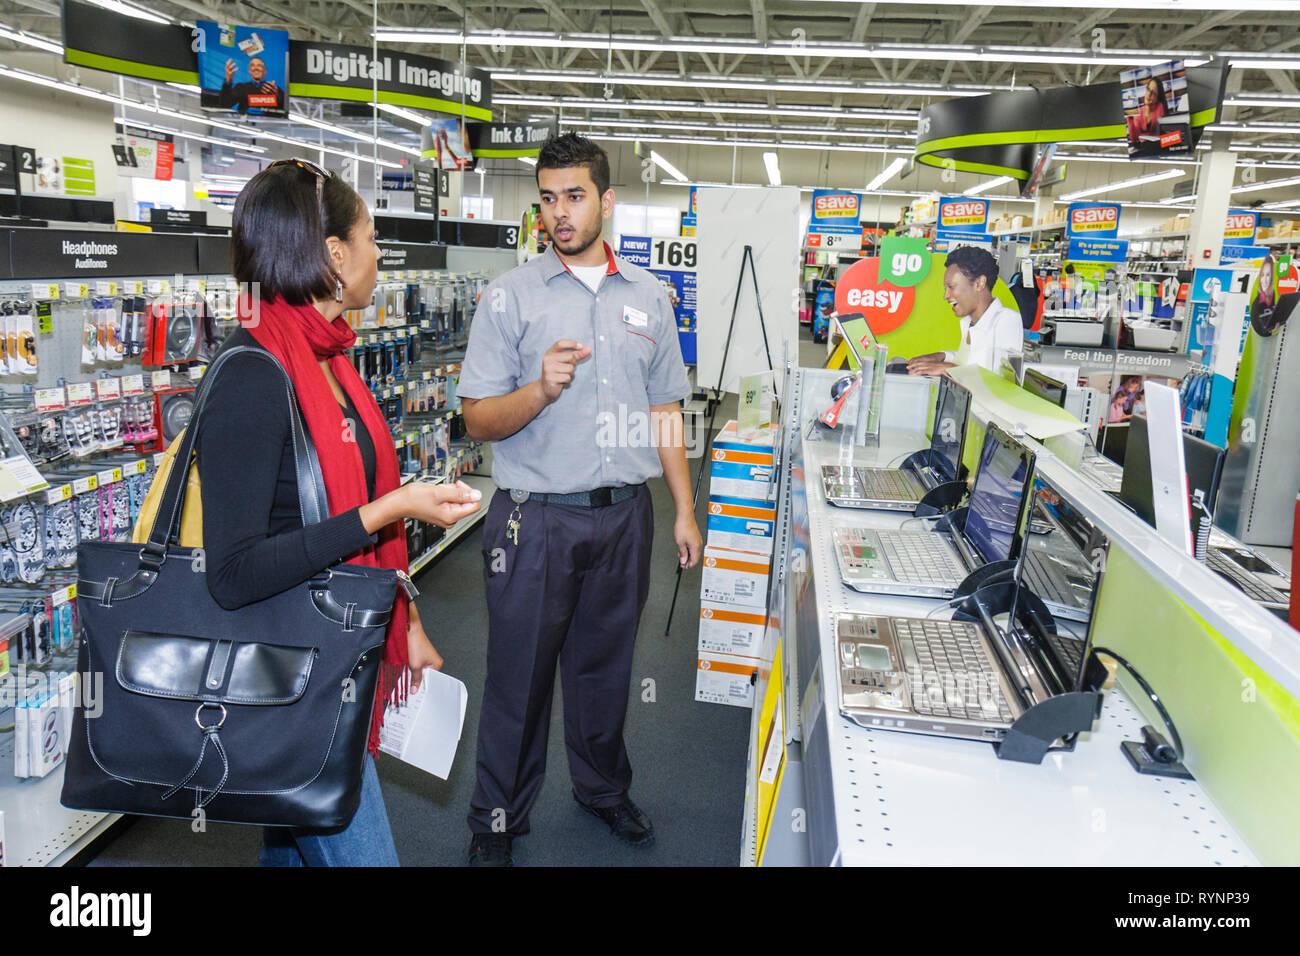 Miami Florida,Staples,office supply products store,chain,display sale laptop,notebook,computer,computer,Hispanic,Black African,man men male,woman fema Stock Photo